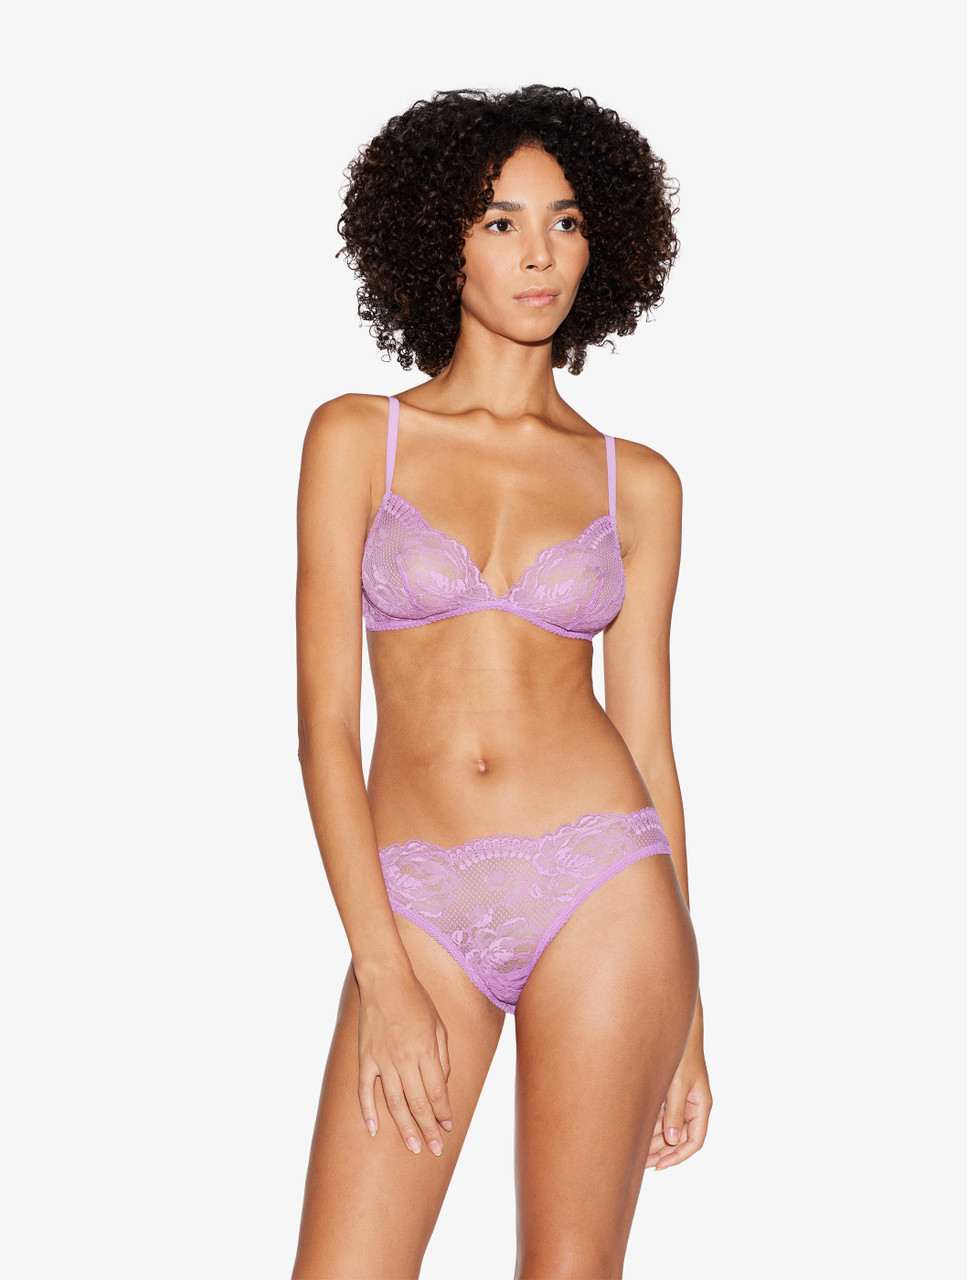 Luxury Lace Non-Wired Bra in Lilac Rose